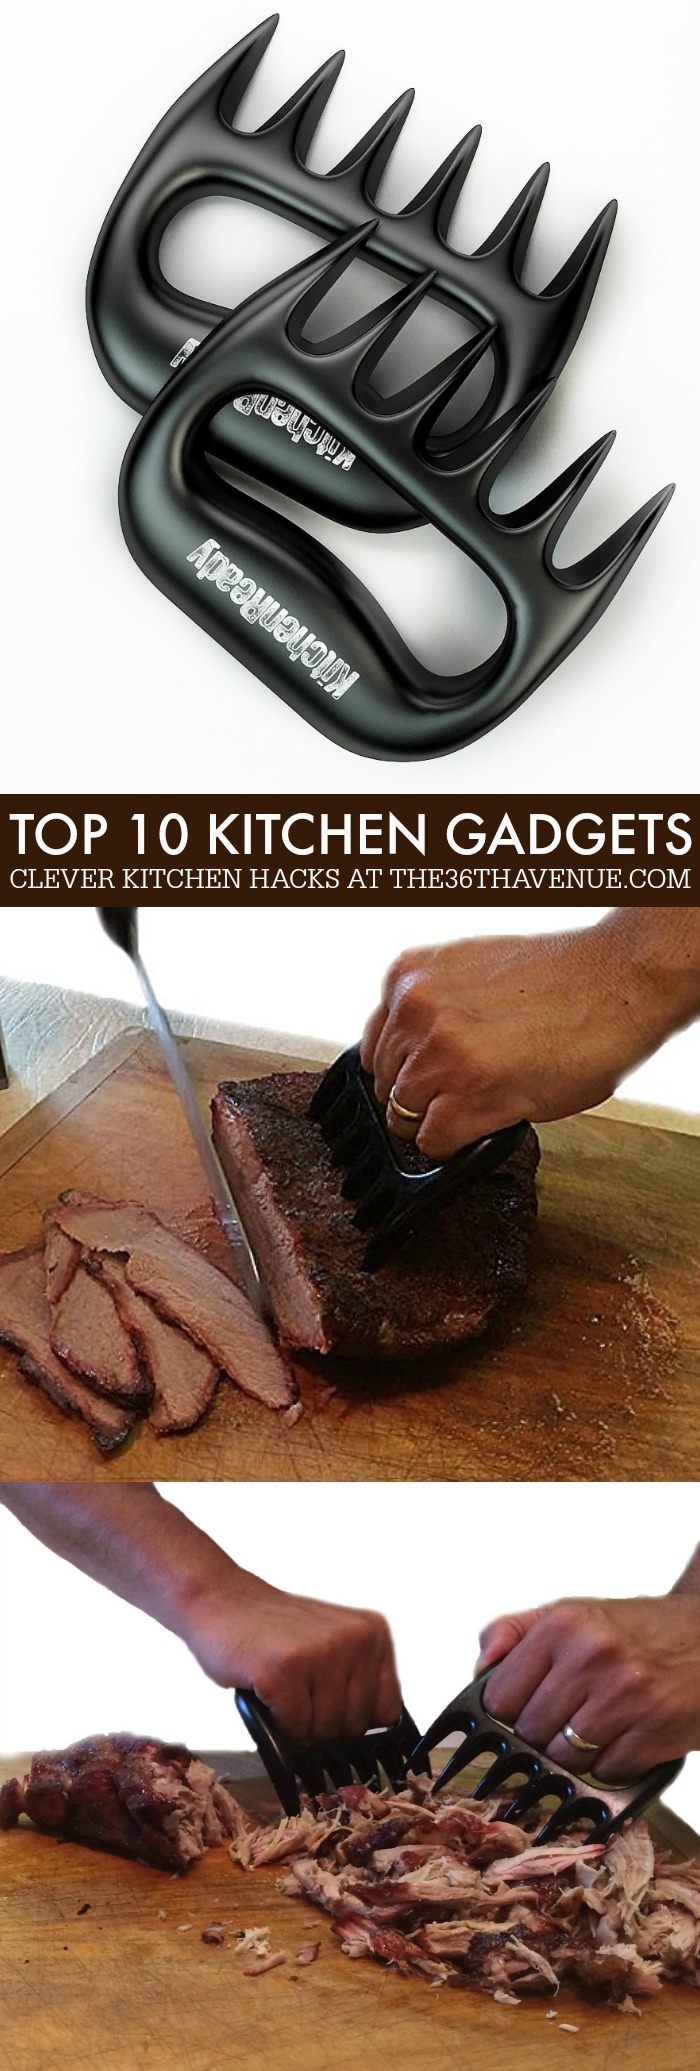 https://www.the36thavenue.com/wp-content/uploads/2015/03/Top-10-Kitchen-Gadgets-at-the36thavenue.com-5.jpg